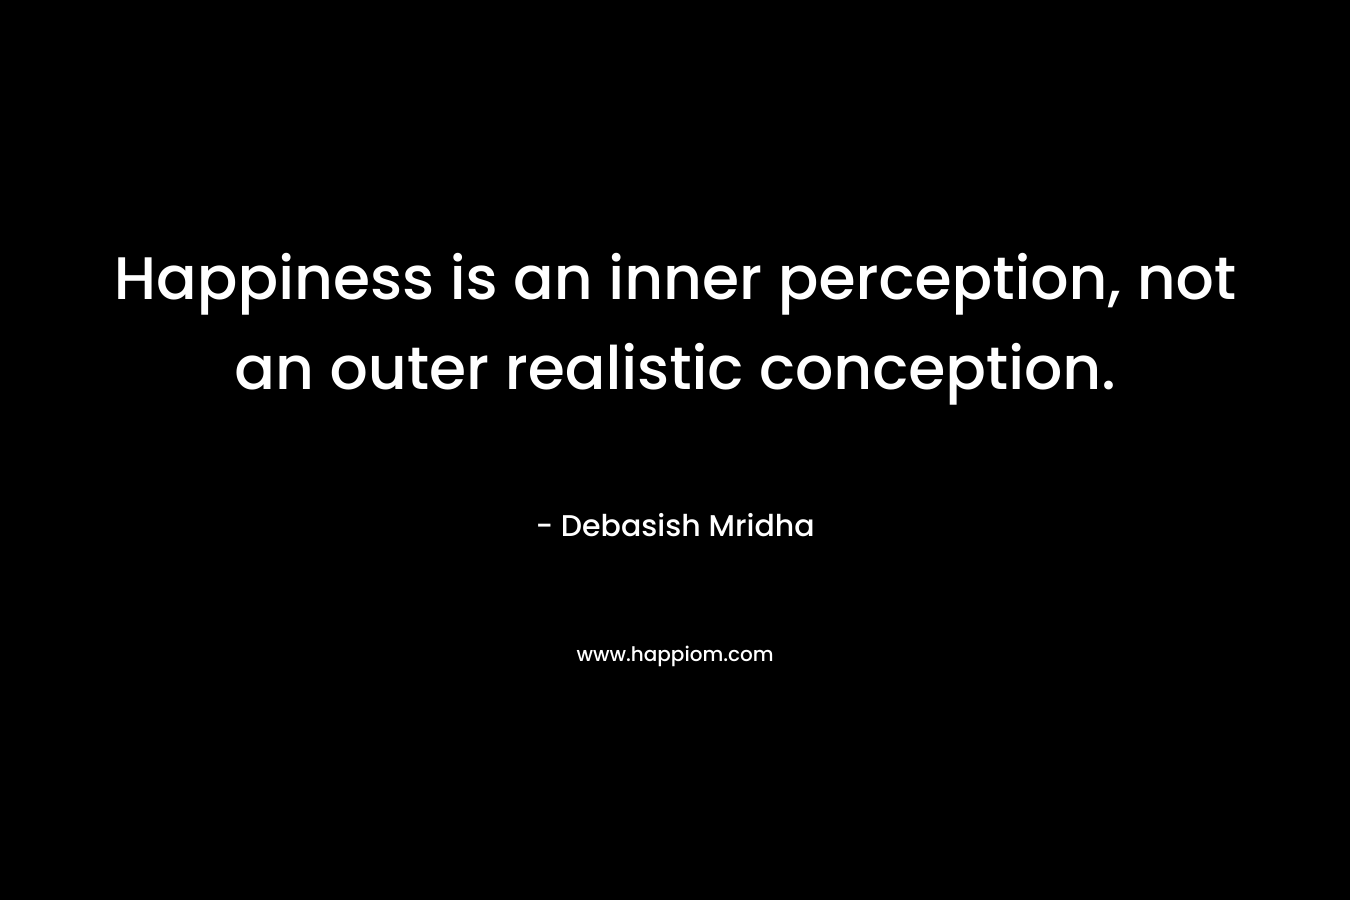 Happiness is an inner perception, not an outer realistic conception. – Debasish Mridha